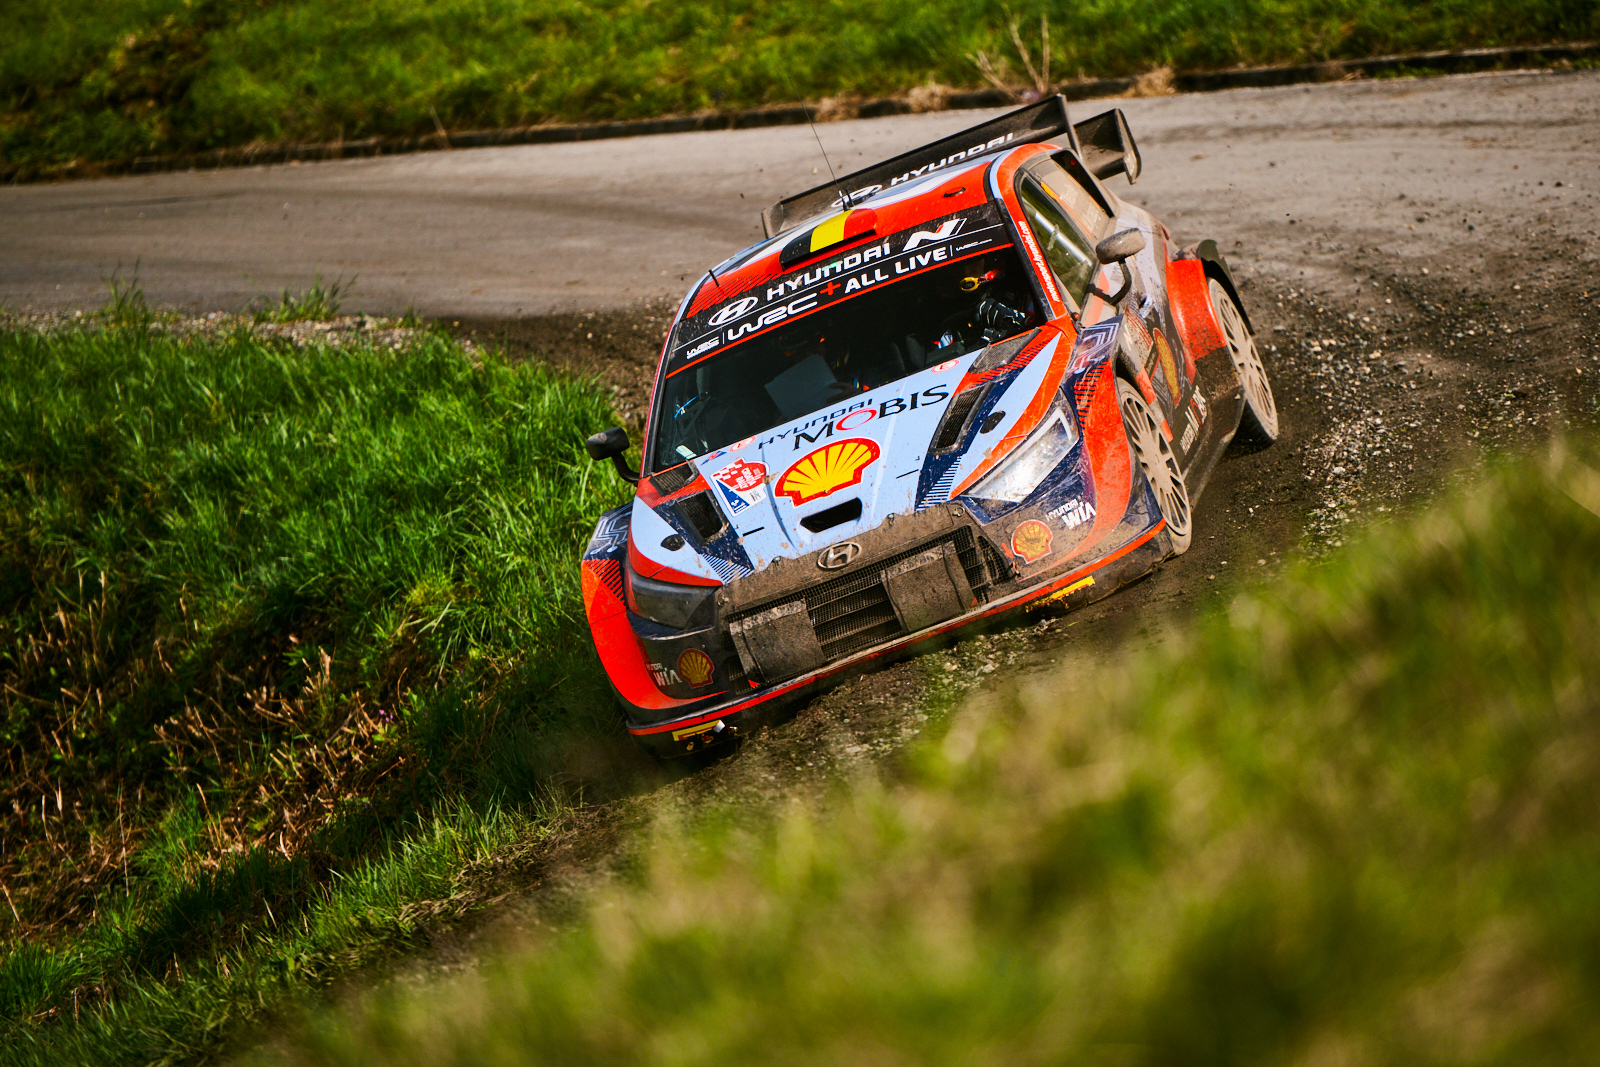 Thierry Neuville receives another fine - 2